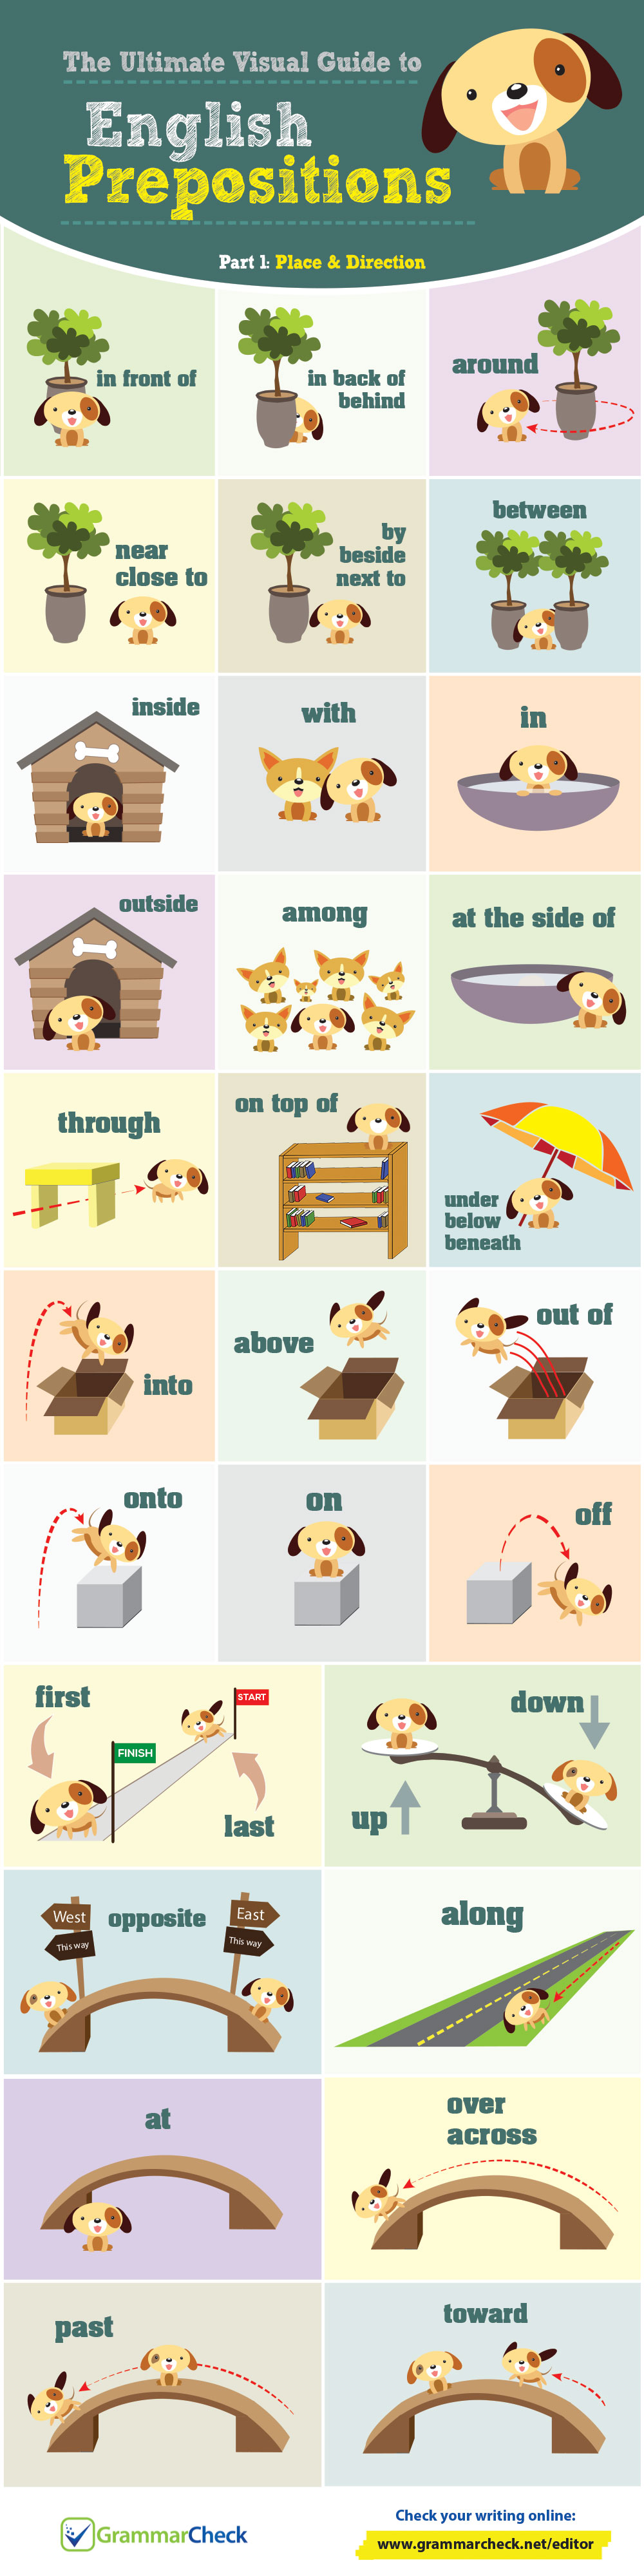 English Prepositions | Place and Direction | Infographic